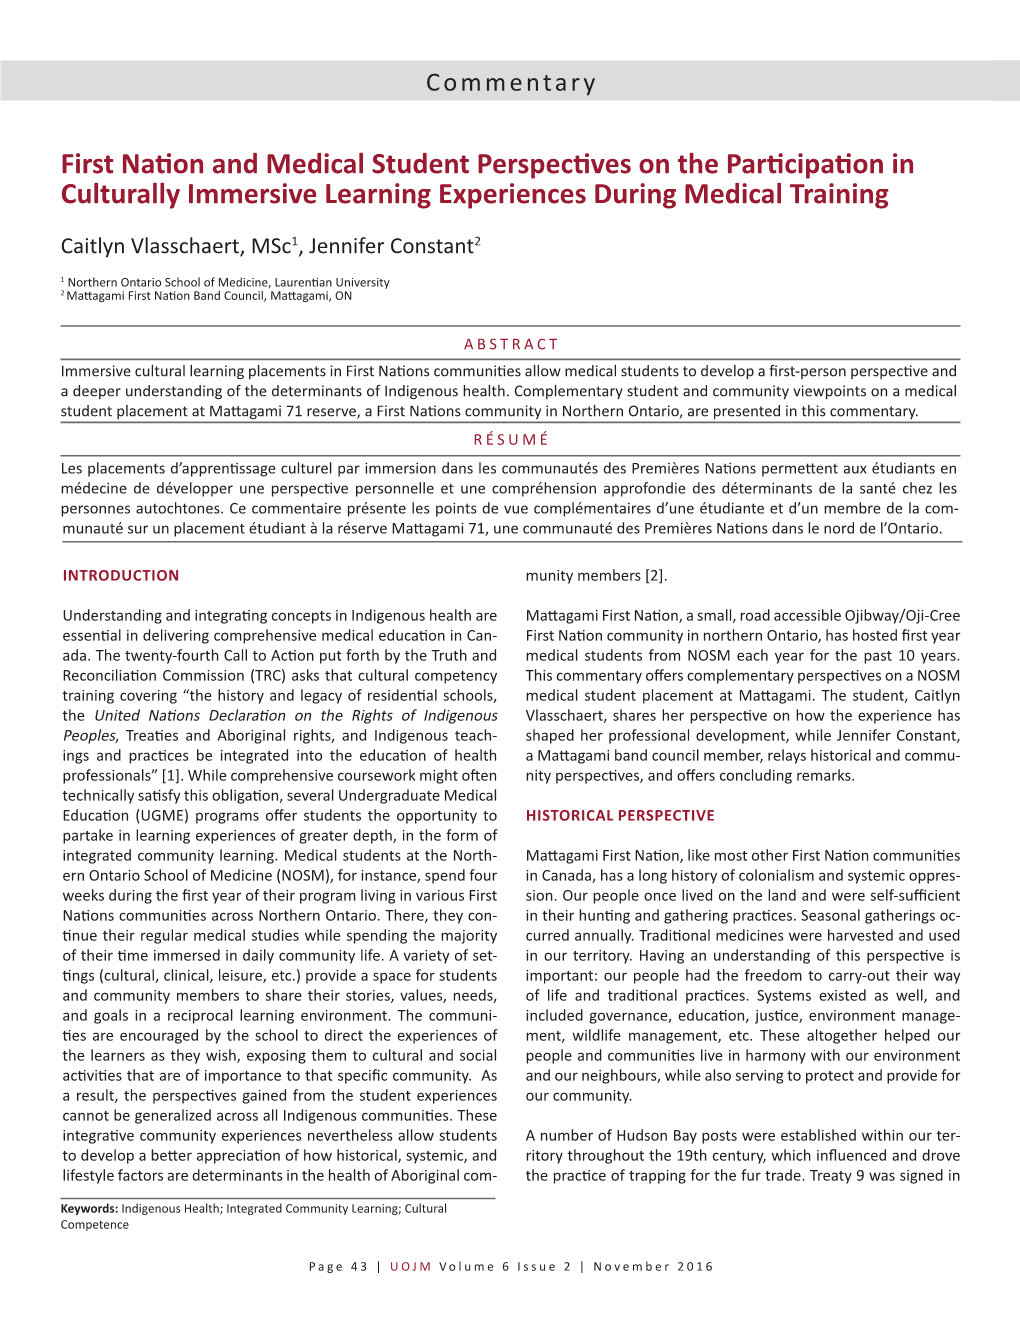 First Nation and Medical Student Perspectives on the Participation in Culturally Immersive Learning Experiences During Medical Training